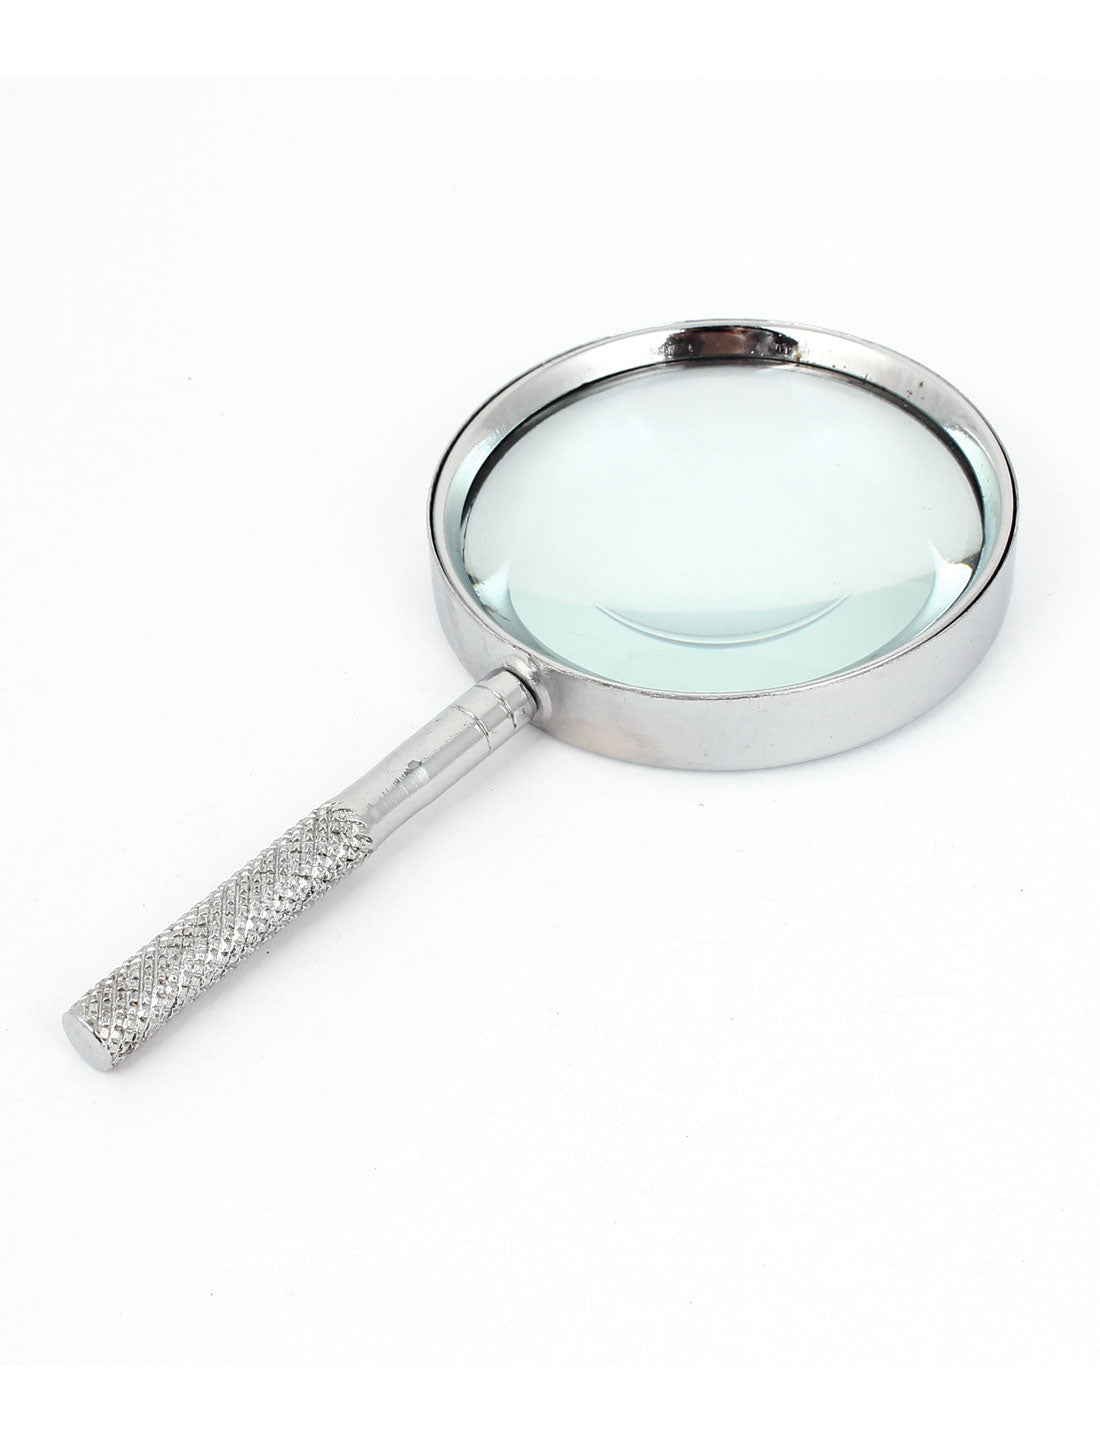 uxcell Uxcell Handheld Metal Shell 60mm Dia Lens 4X Magnifying Glass Magnifier Silver Tone